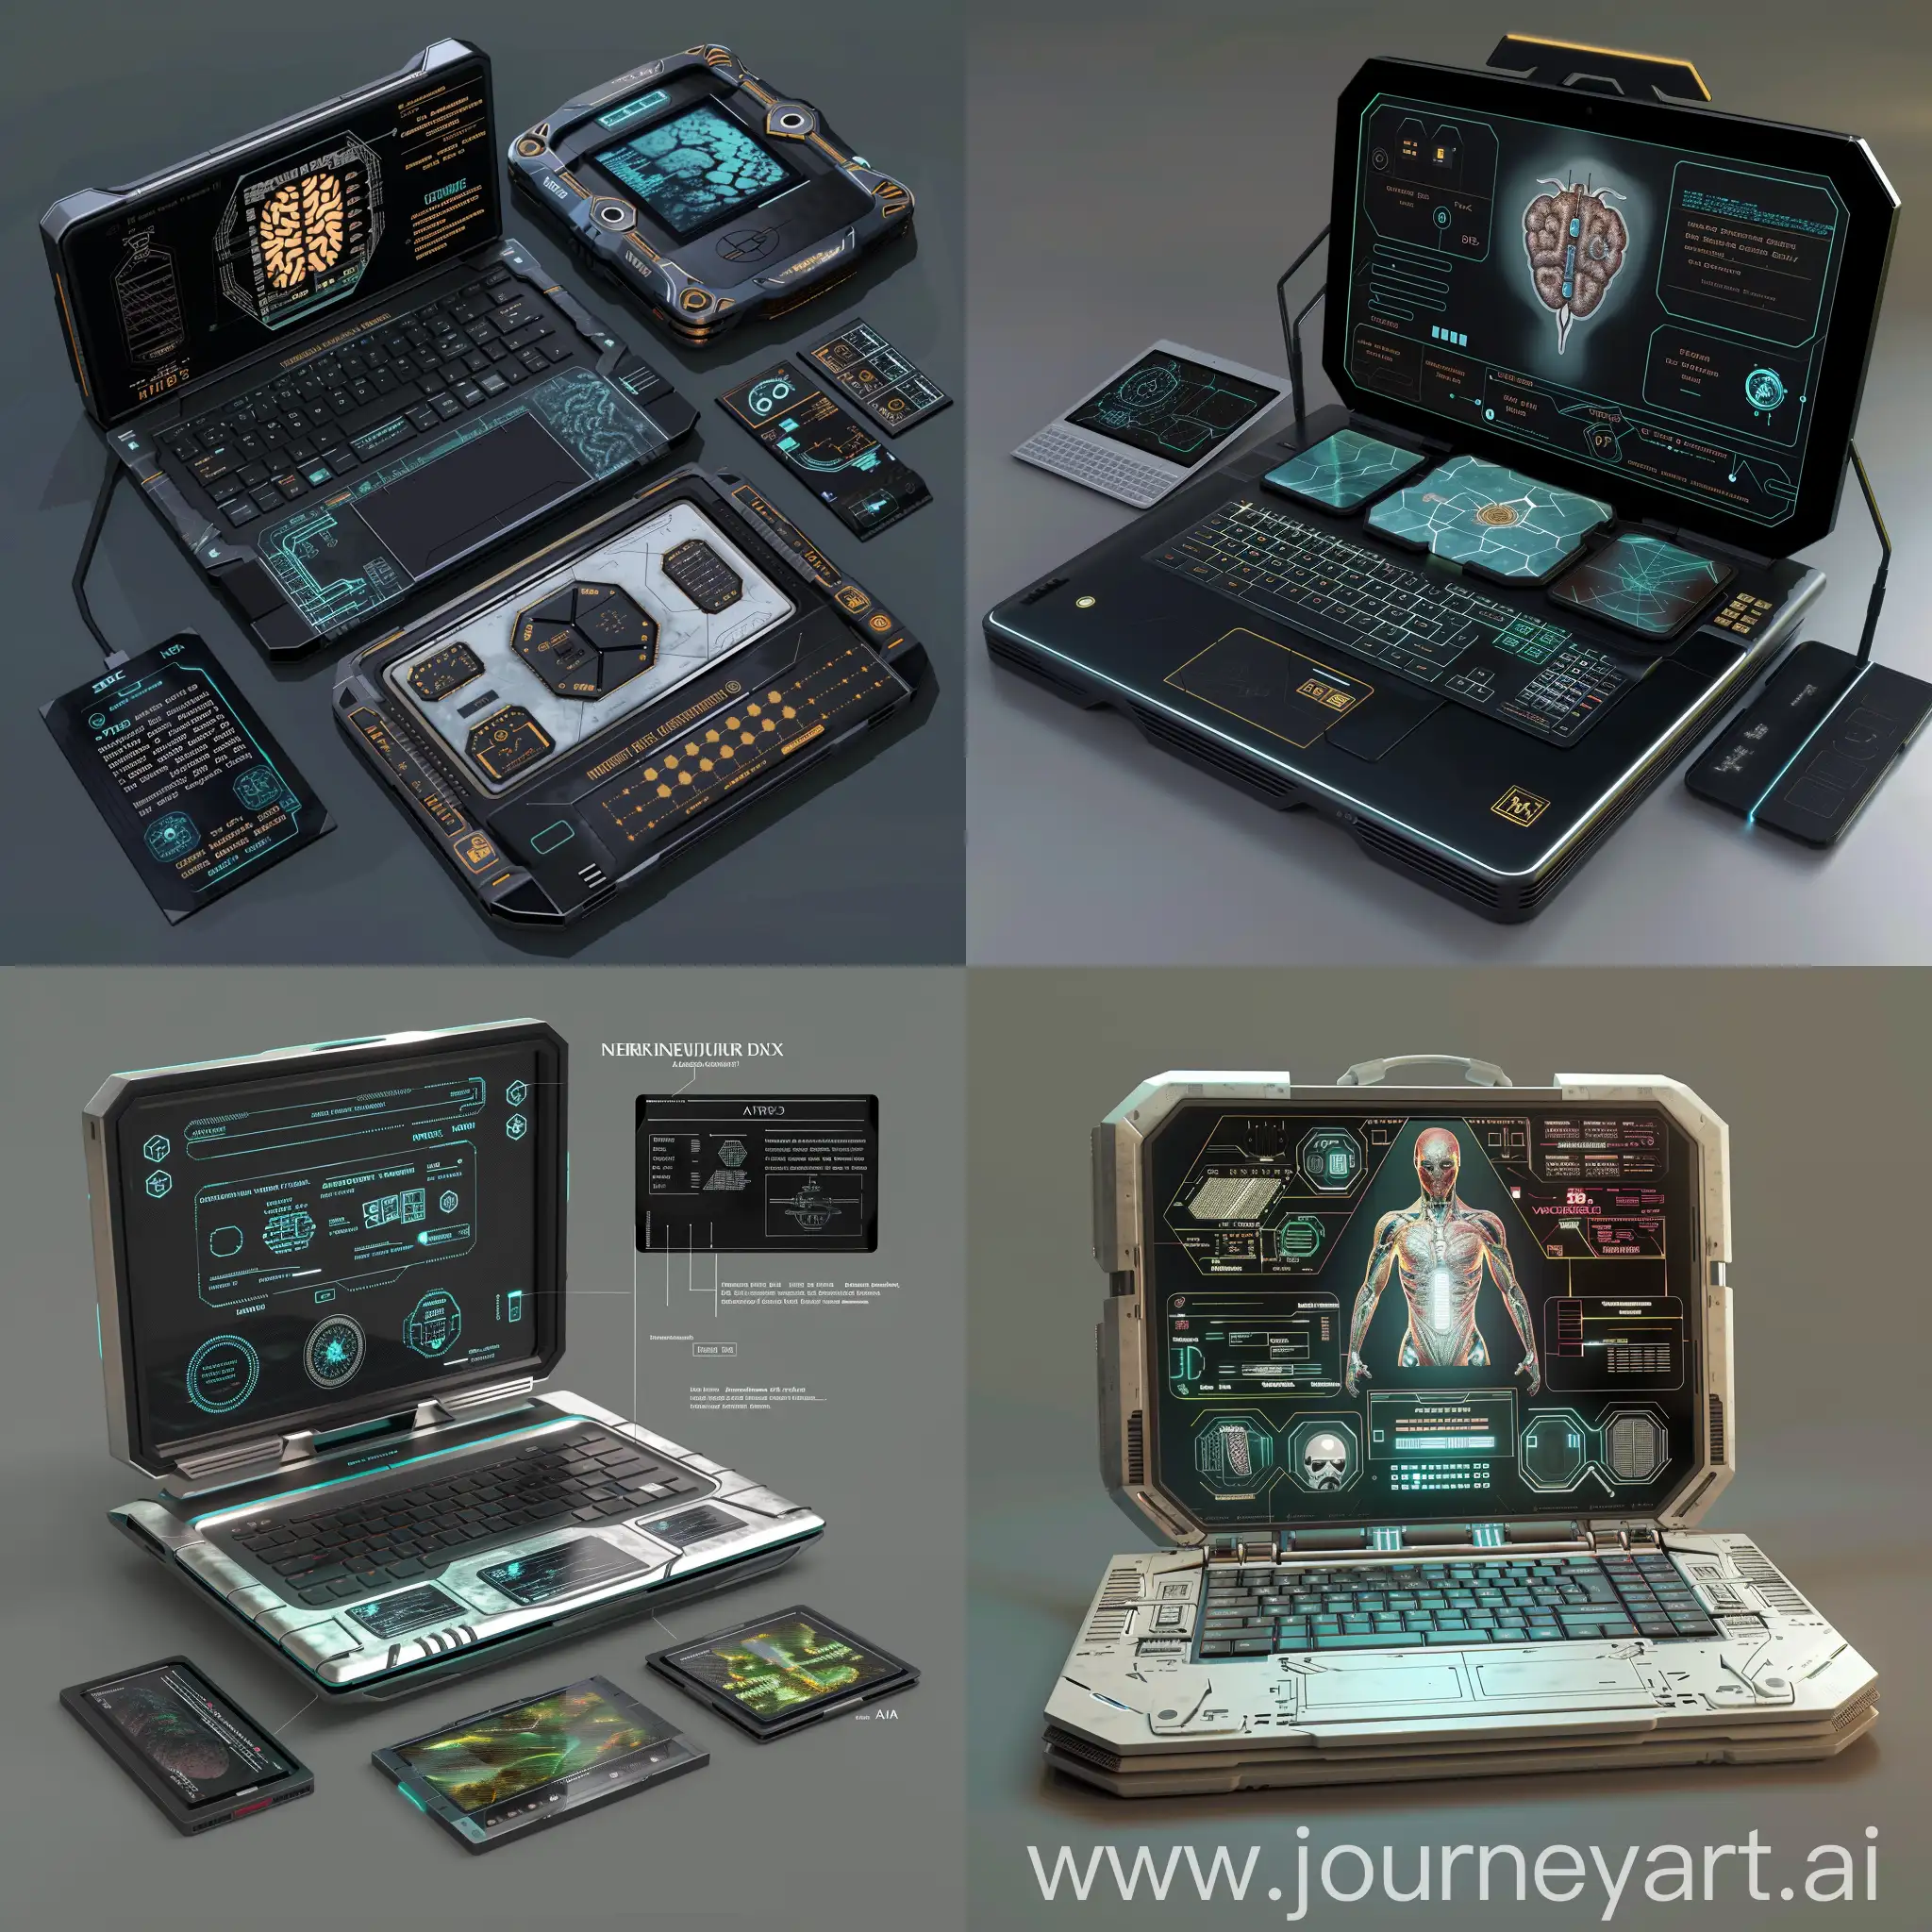 Futuristic-Laptop-with-Neural-Processing-Unit-and-BioOrganic-Battery